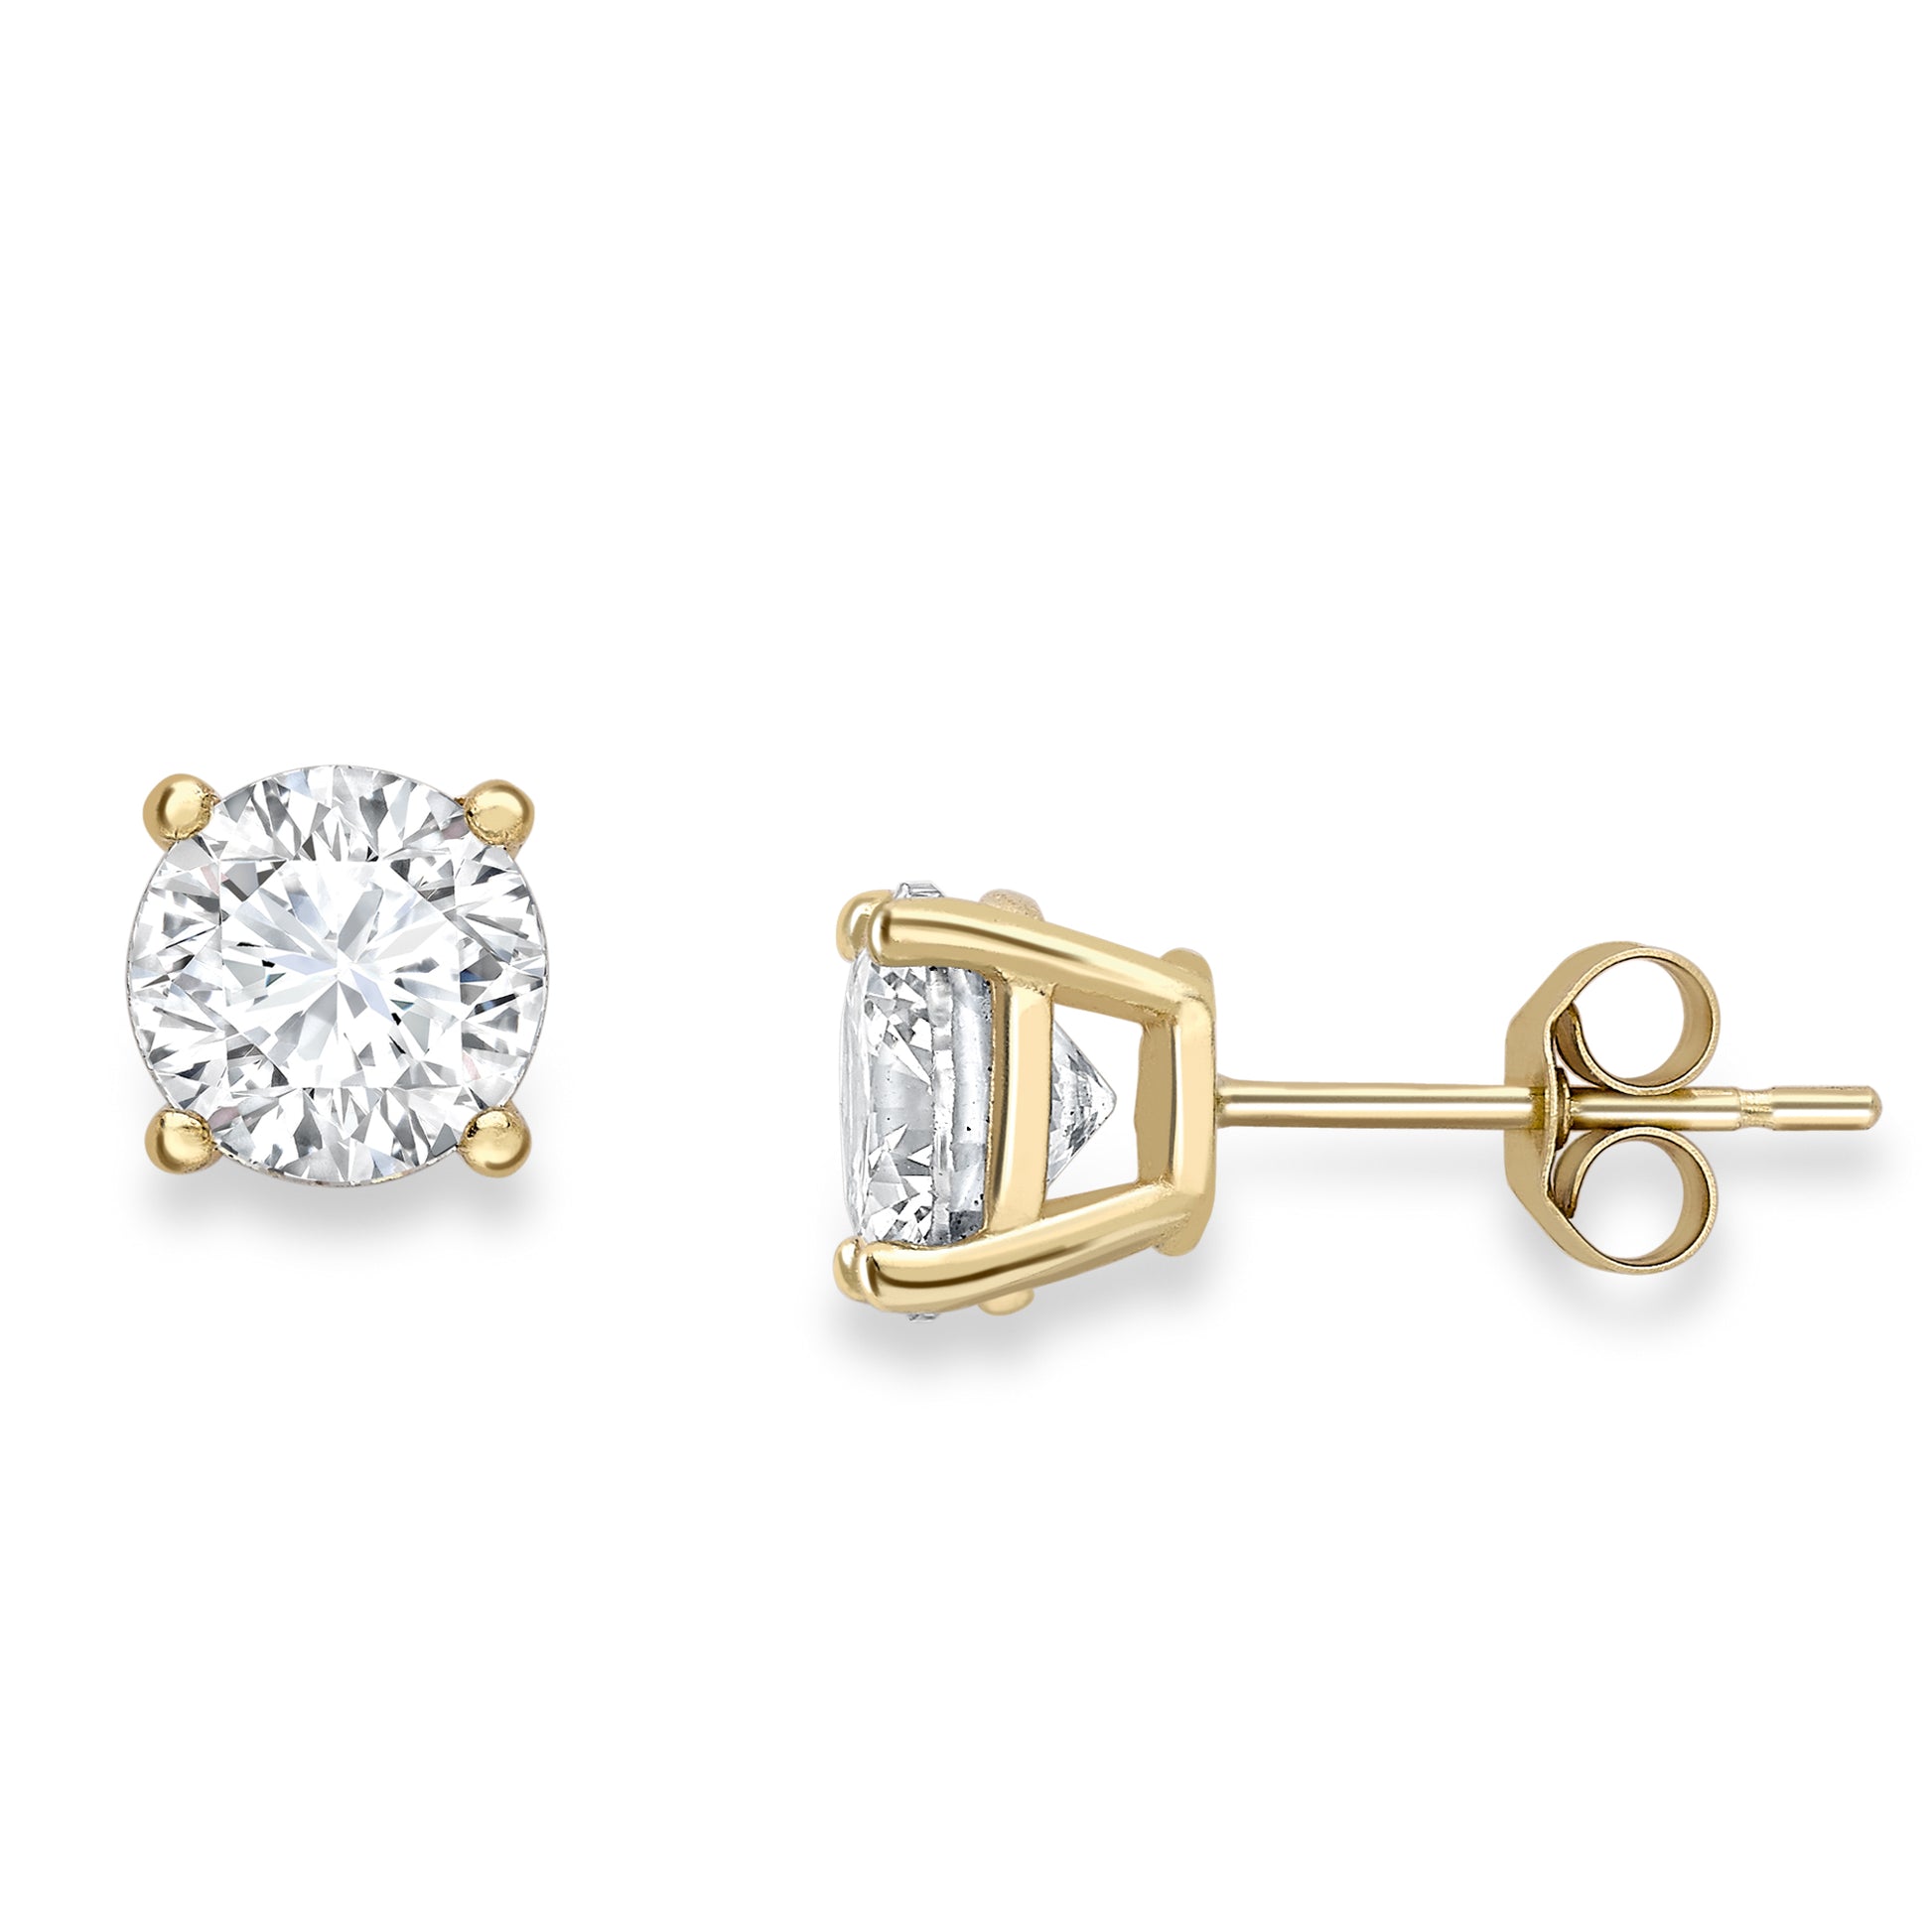 9ct Gold  CZ Simple 4-Claw Solitaire Stud Earrings 6mm - SENR02606